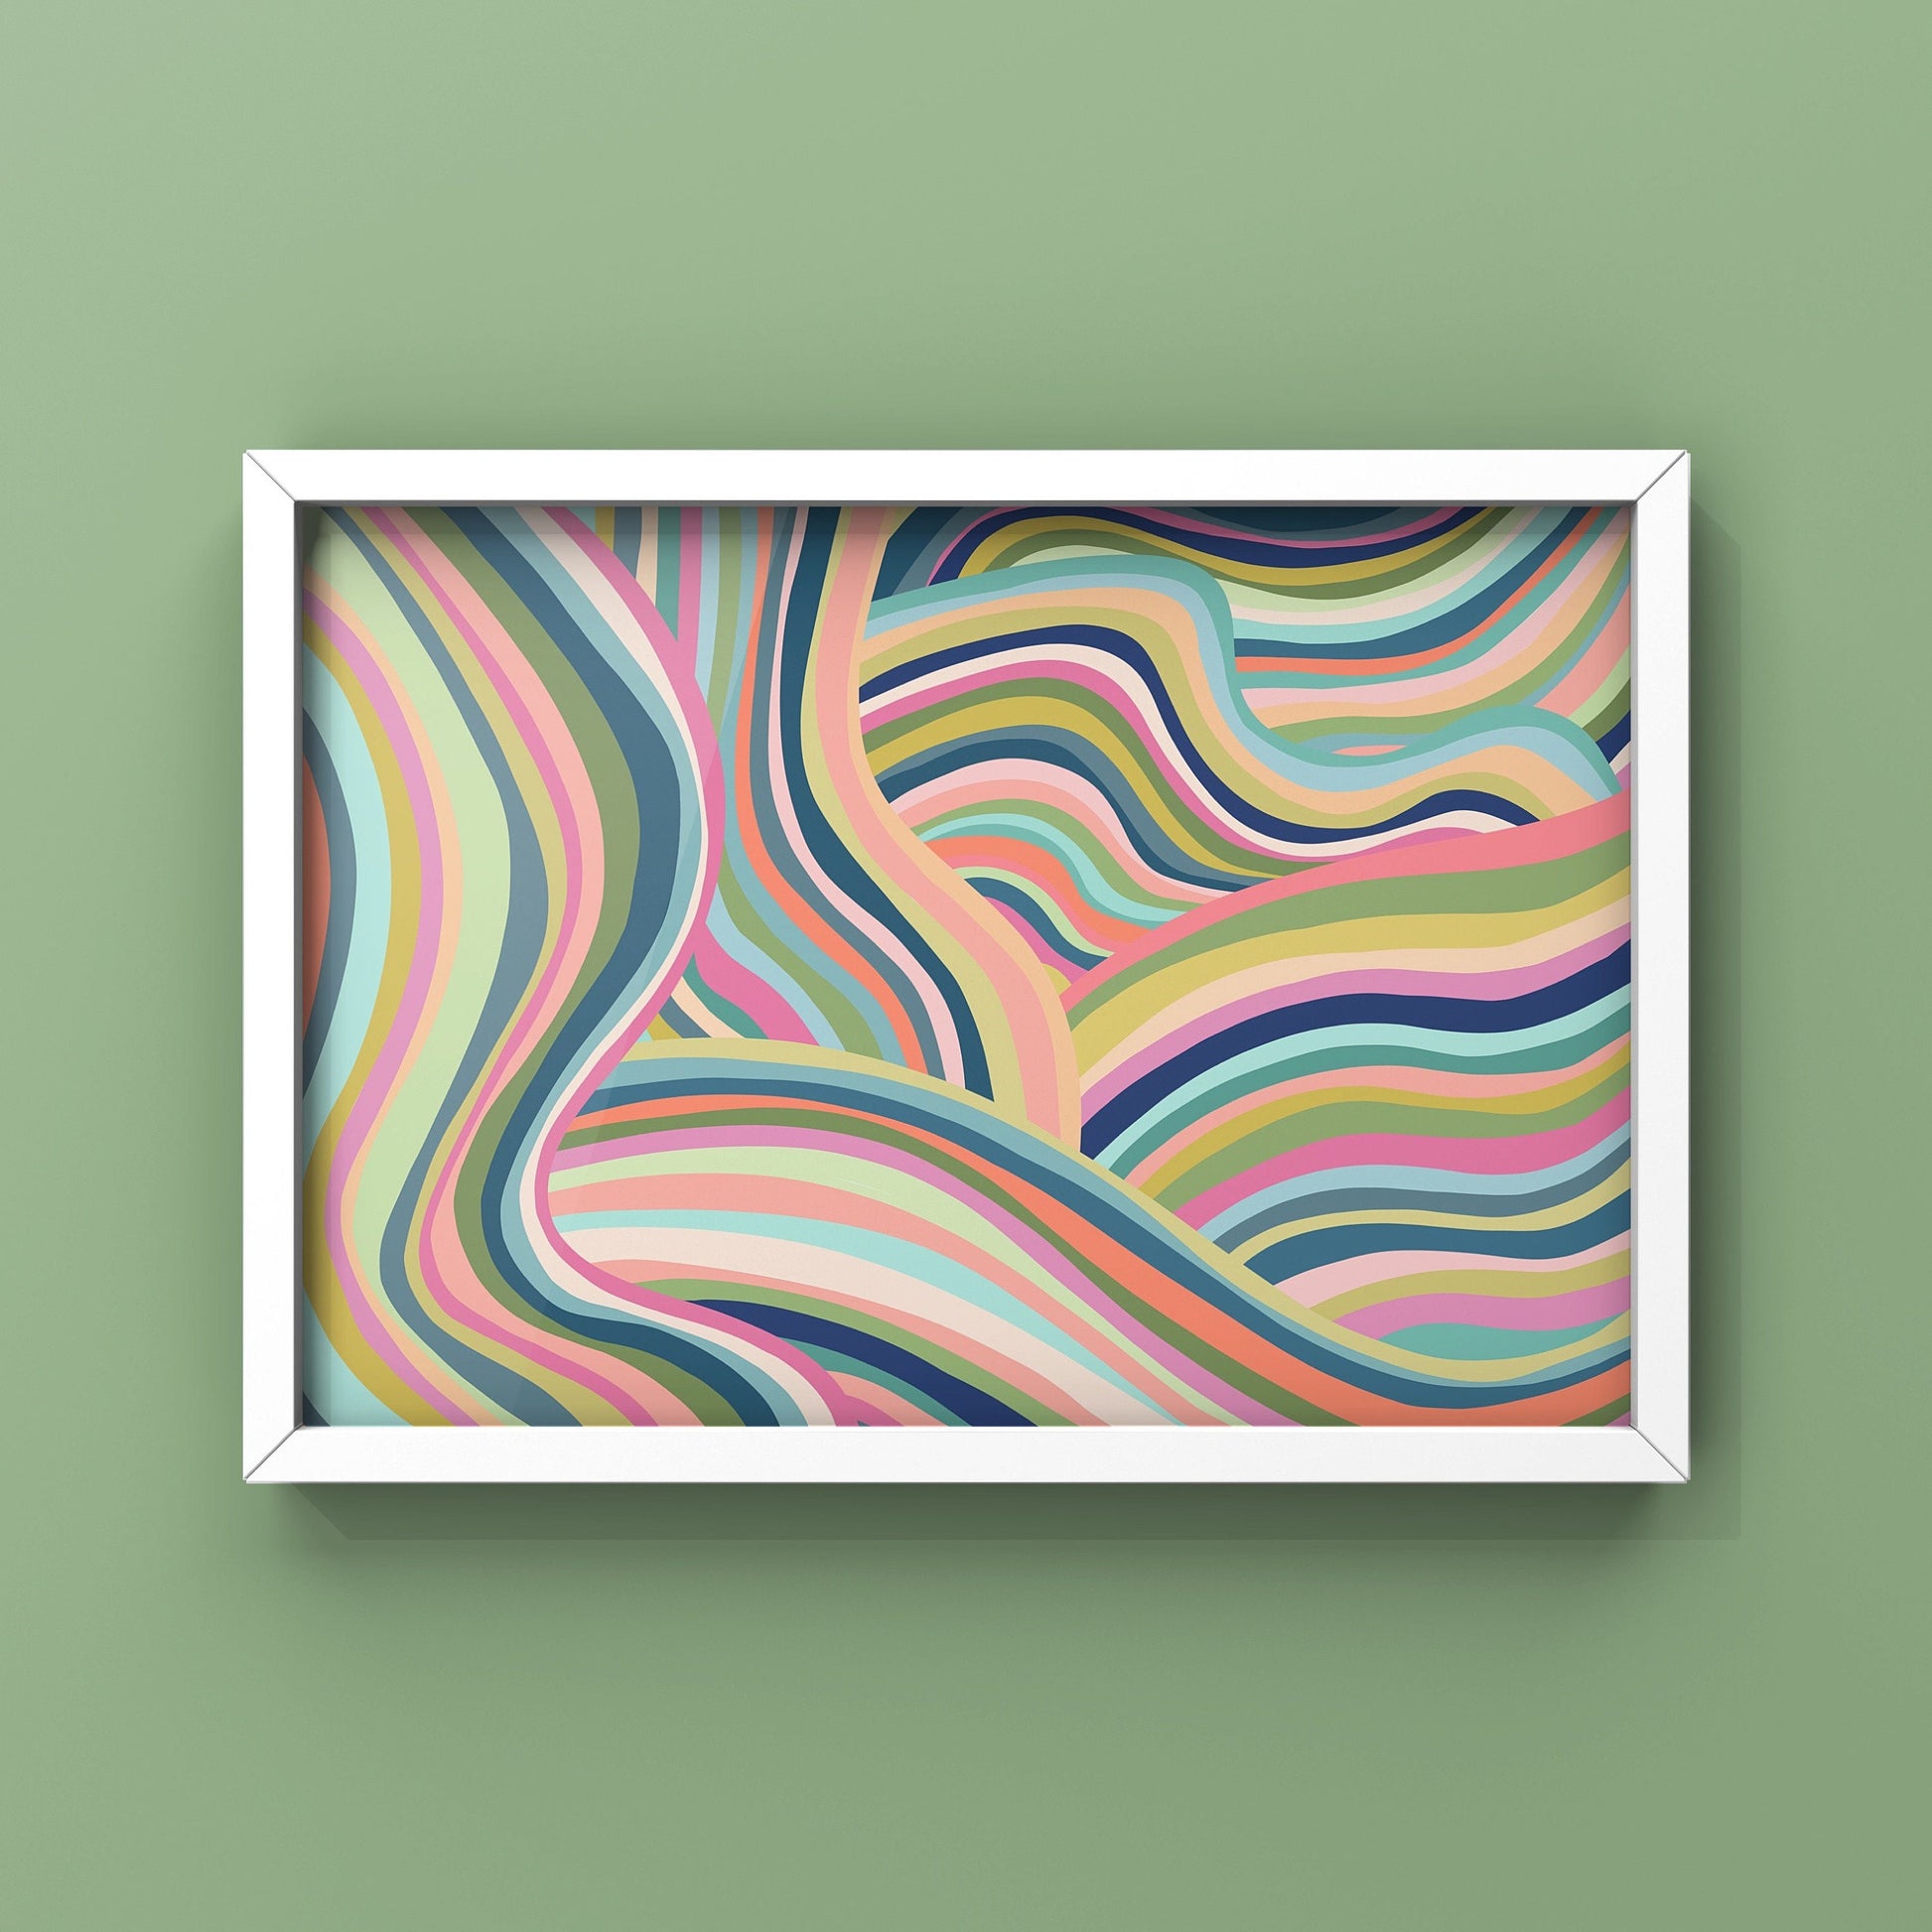 Out with boring old plain artwork and in with the bright, funky, groovy wall art! This colorful, abstract pattern will brighten up any space. And we mean ANY space because how could this beauty not!? If you're a fan of fun, this is the art print for you. Get yours today and spruce up those bare walls! This abstract striation artwork was completely hand-drawn, with lots of love!